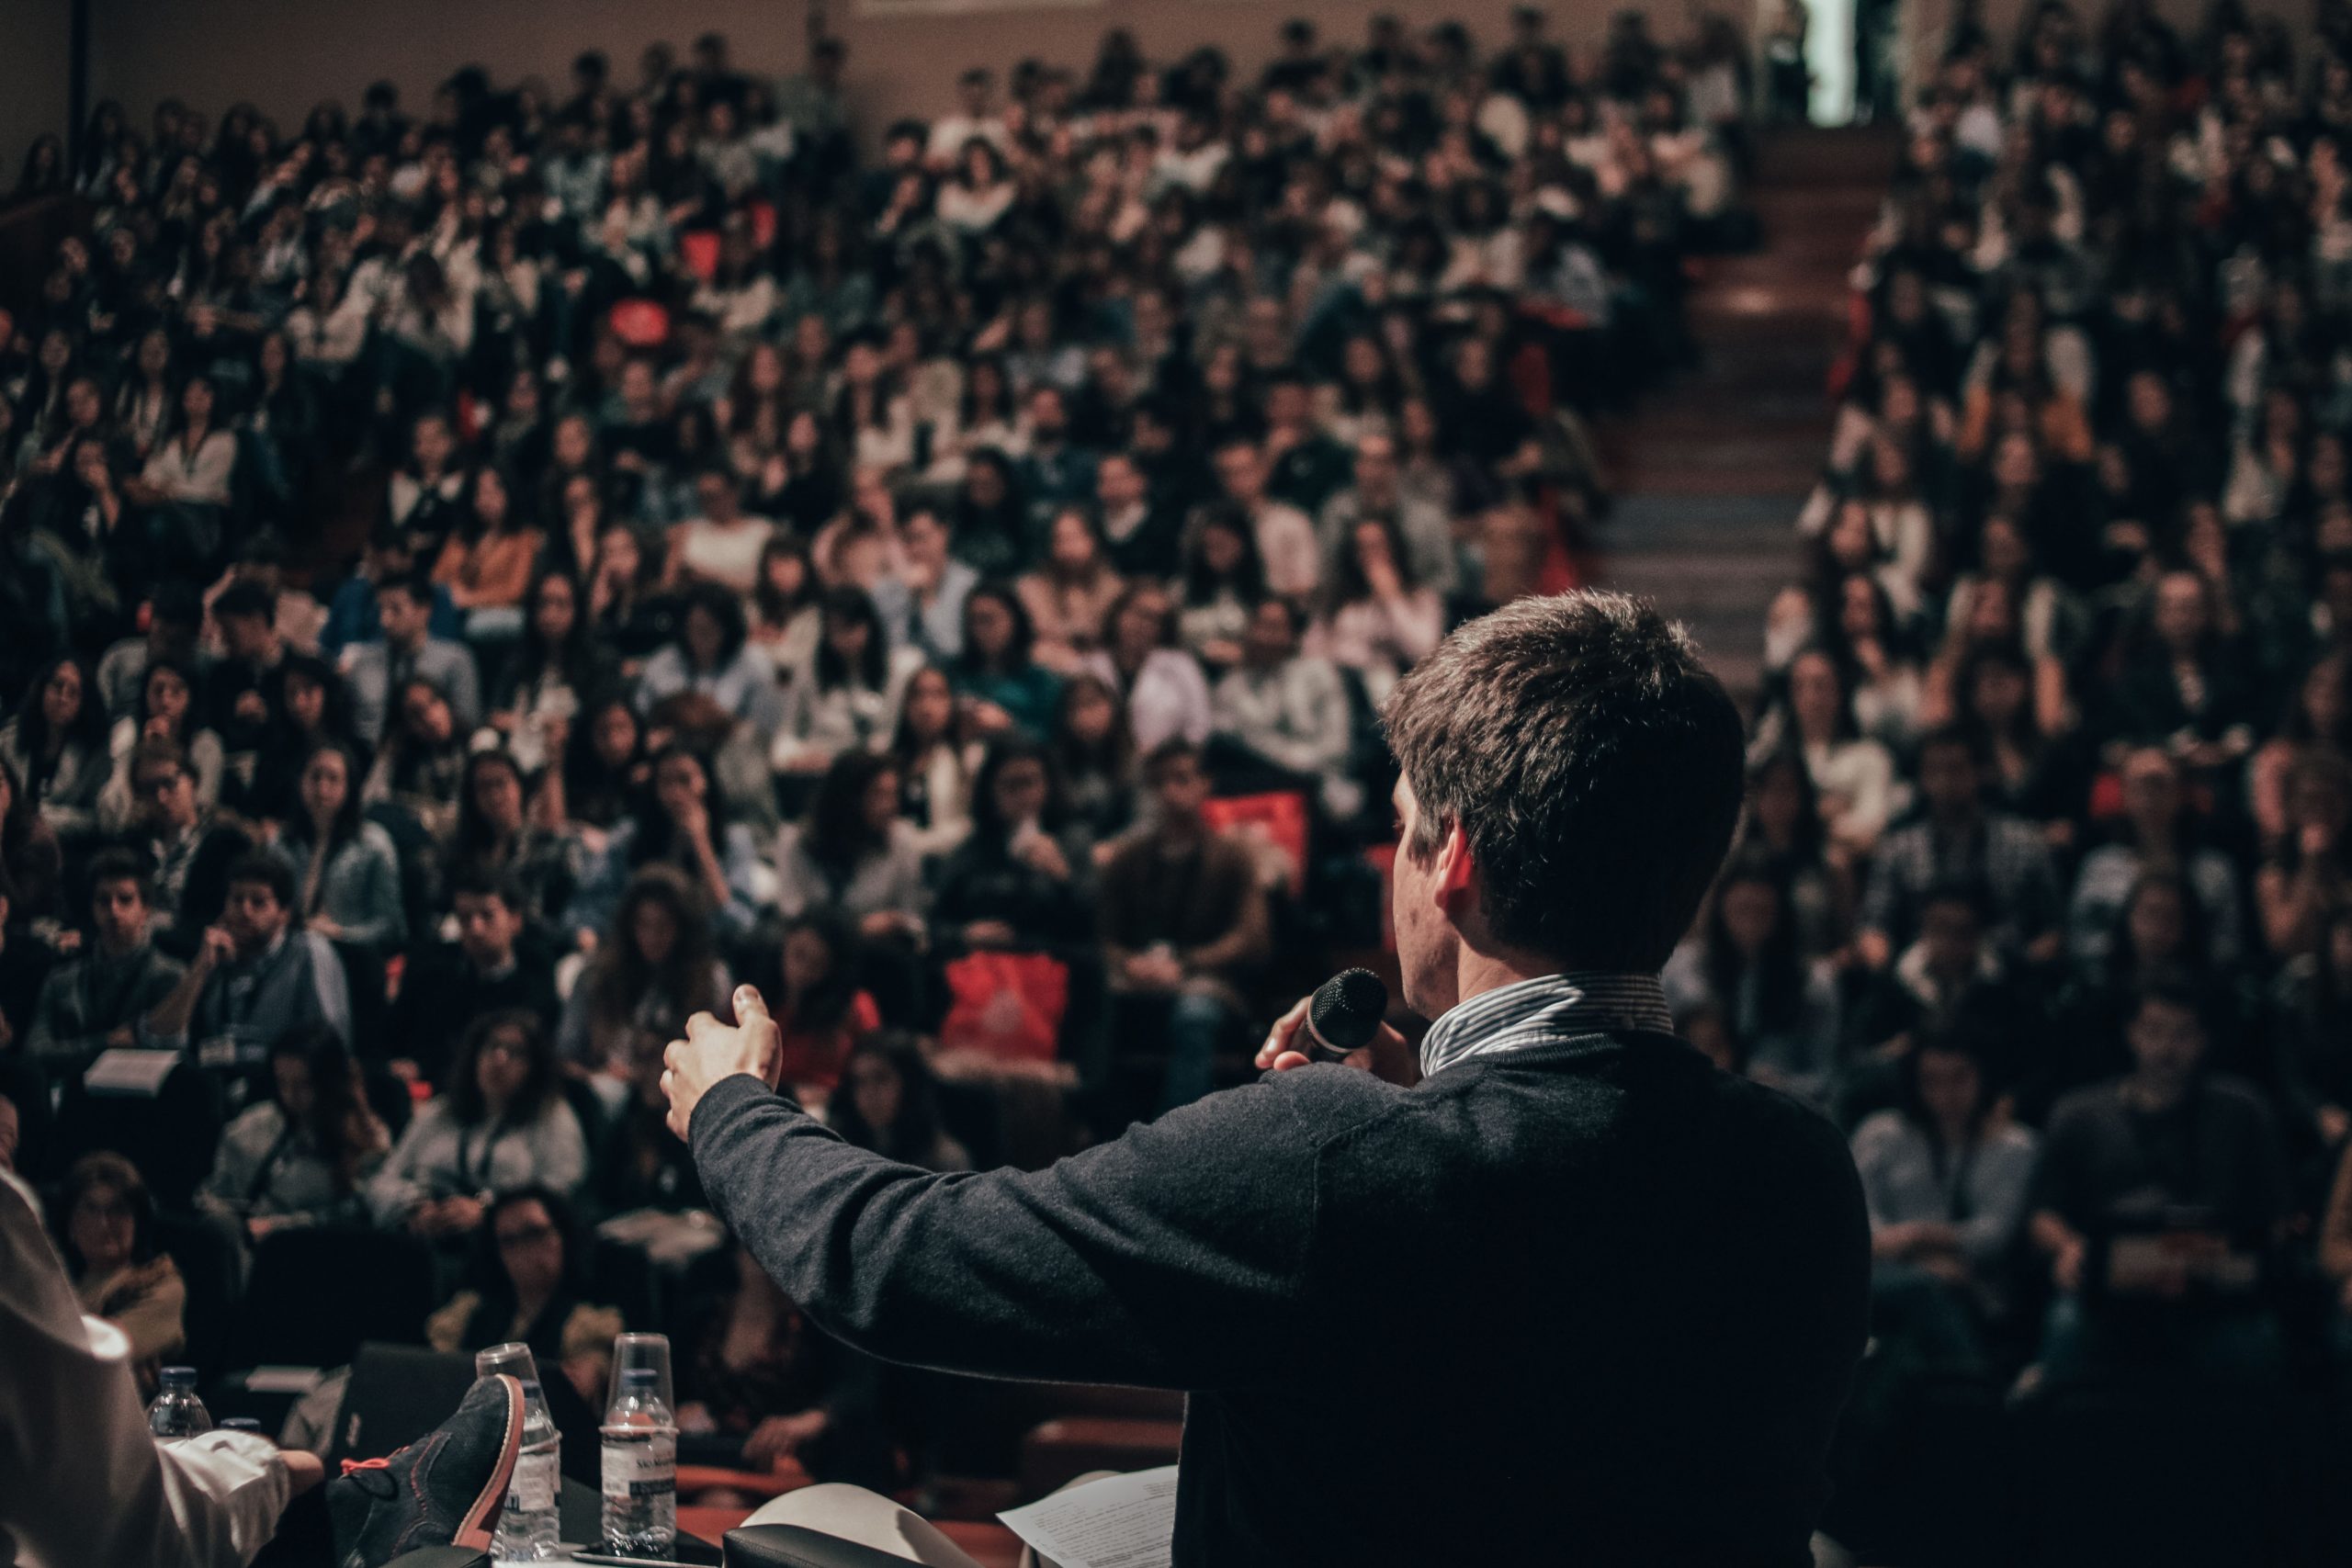 Public Speaking: Why Your Voice Matters More than Your Words